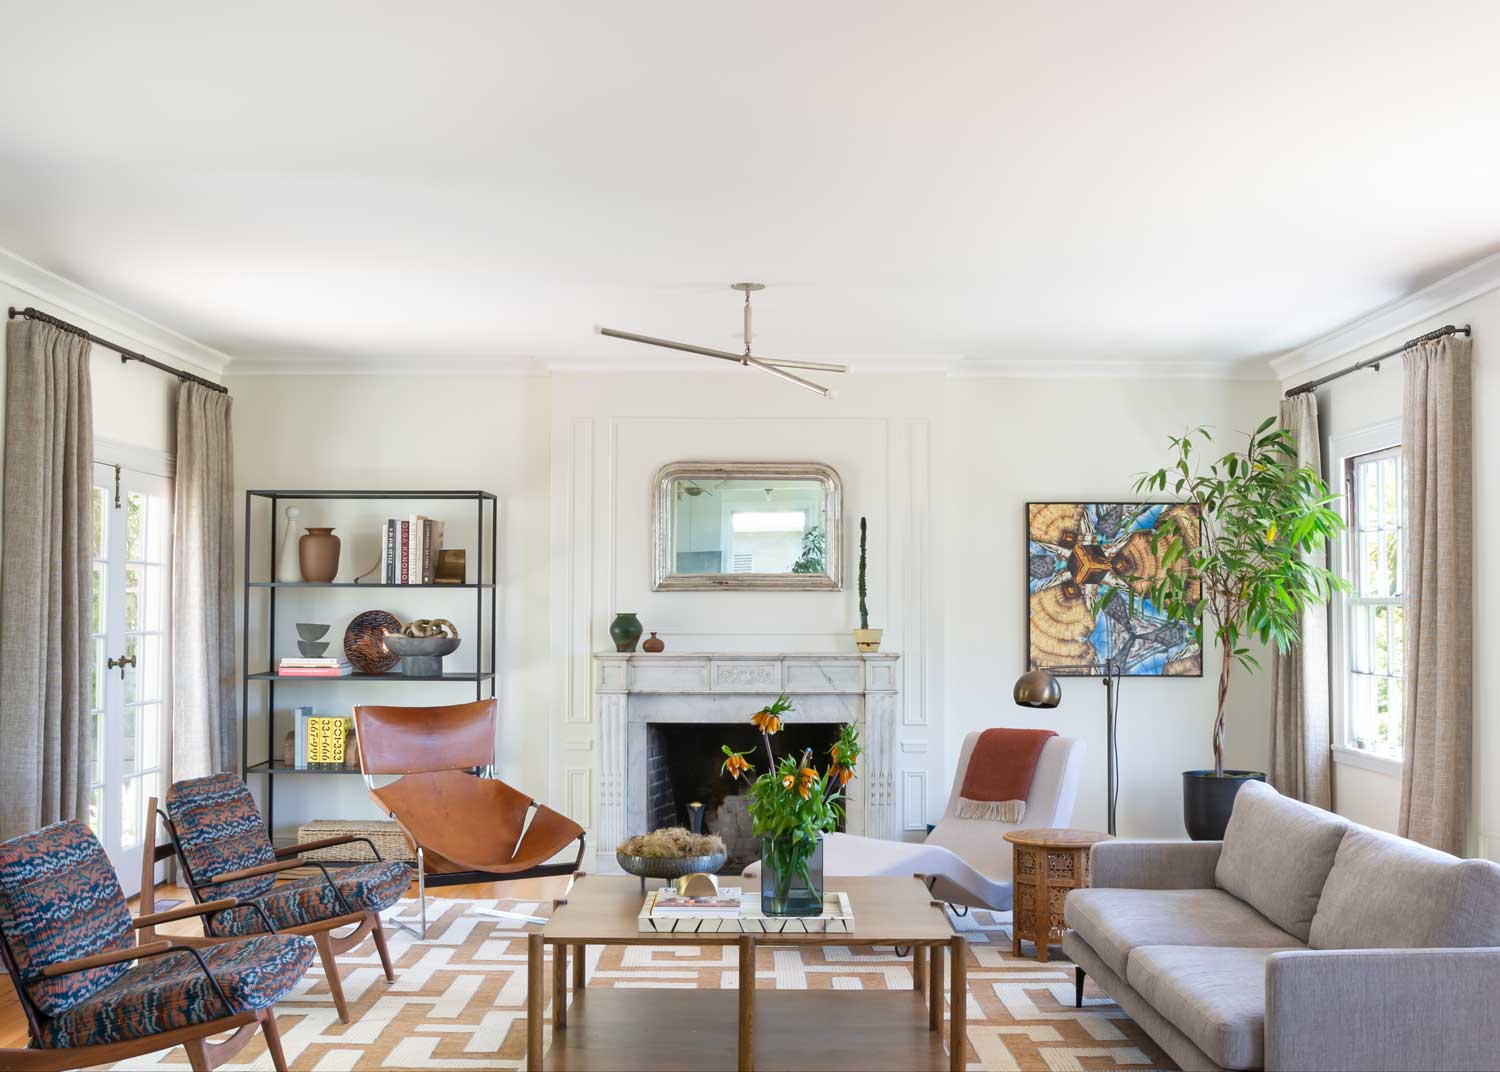 living room with white fireplace and mantel, printed rug and printed chairs